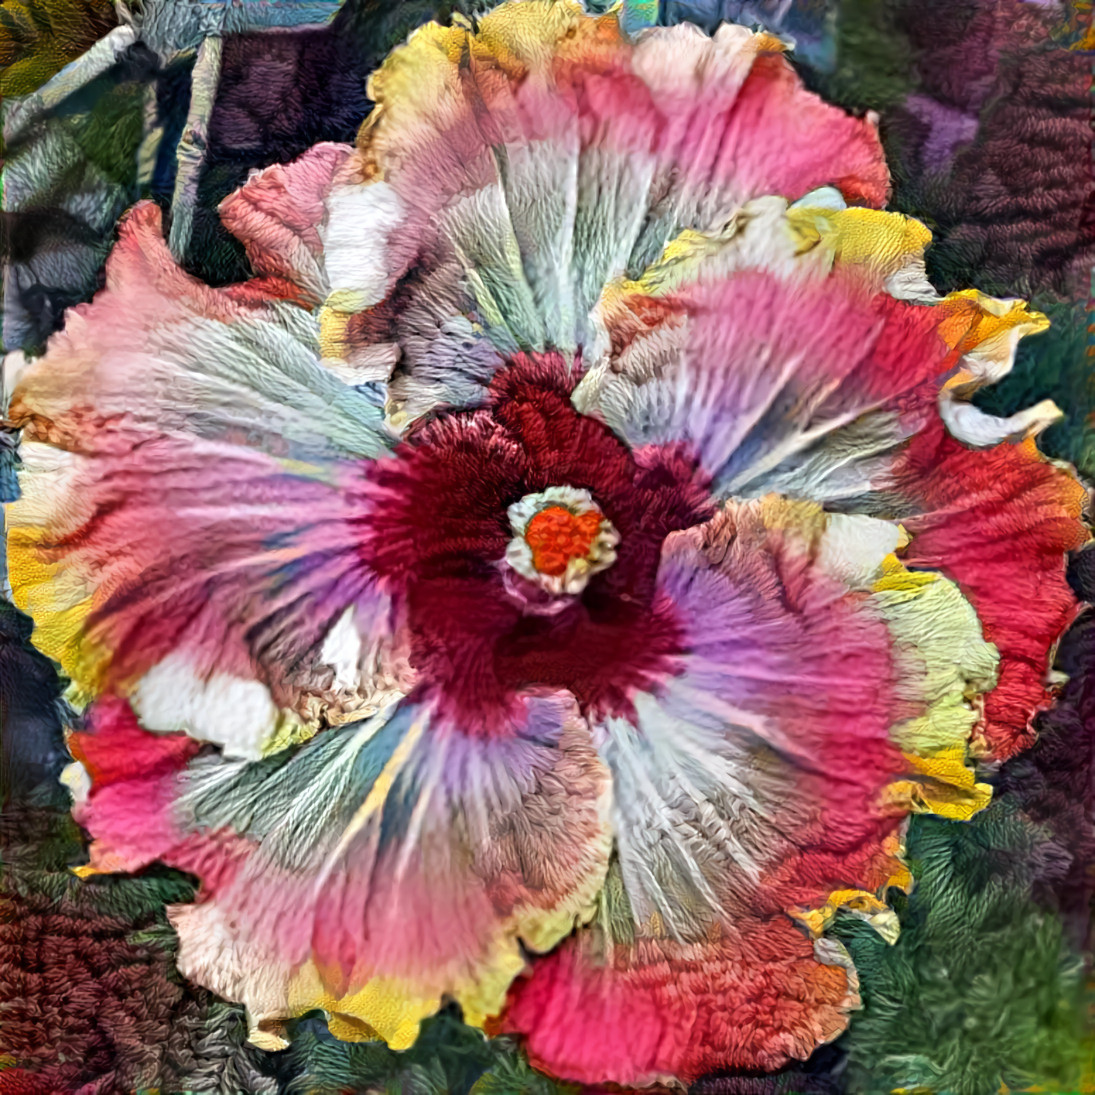 Embroidered Fiery Furnace Hibiscus [1.2MP]